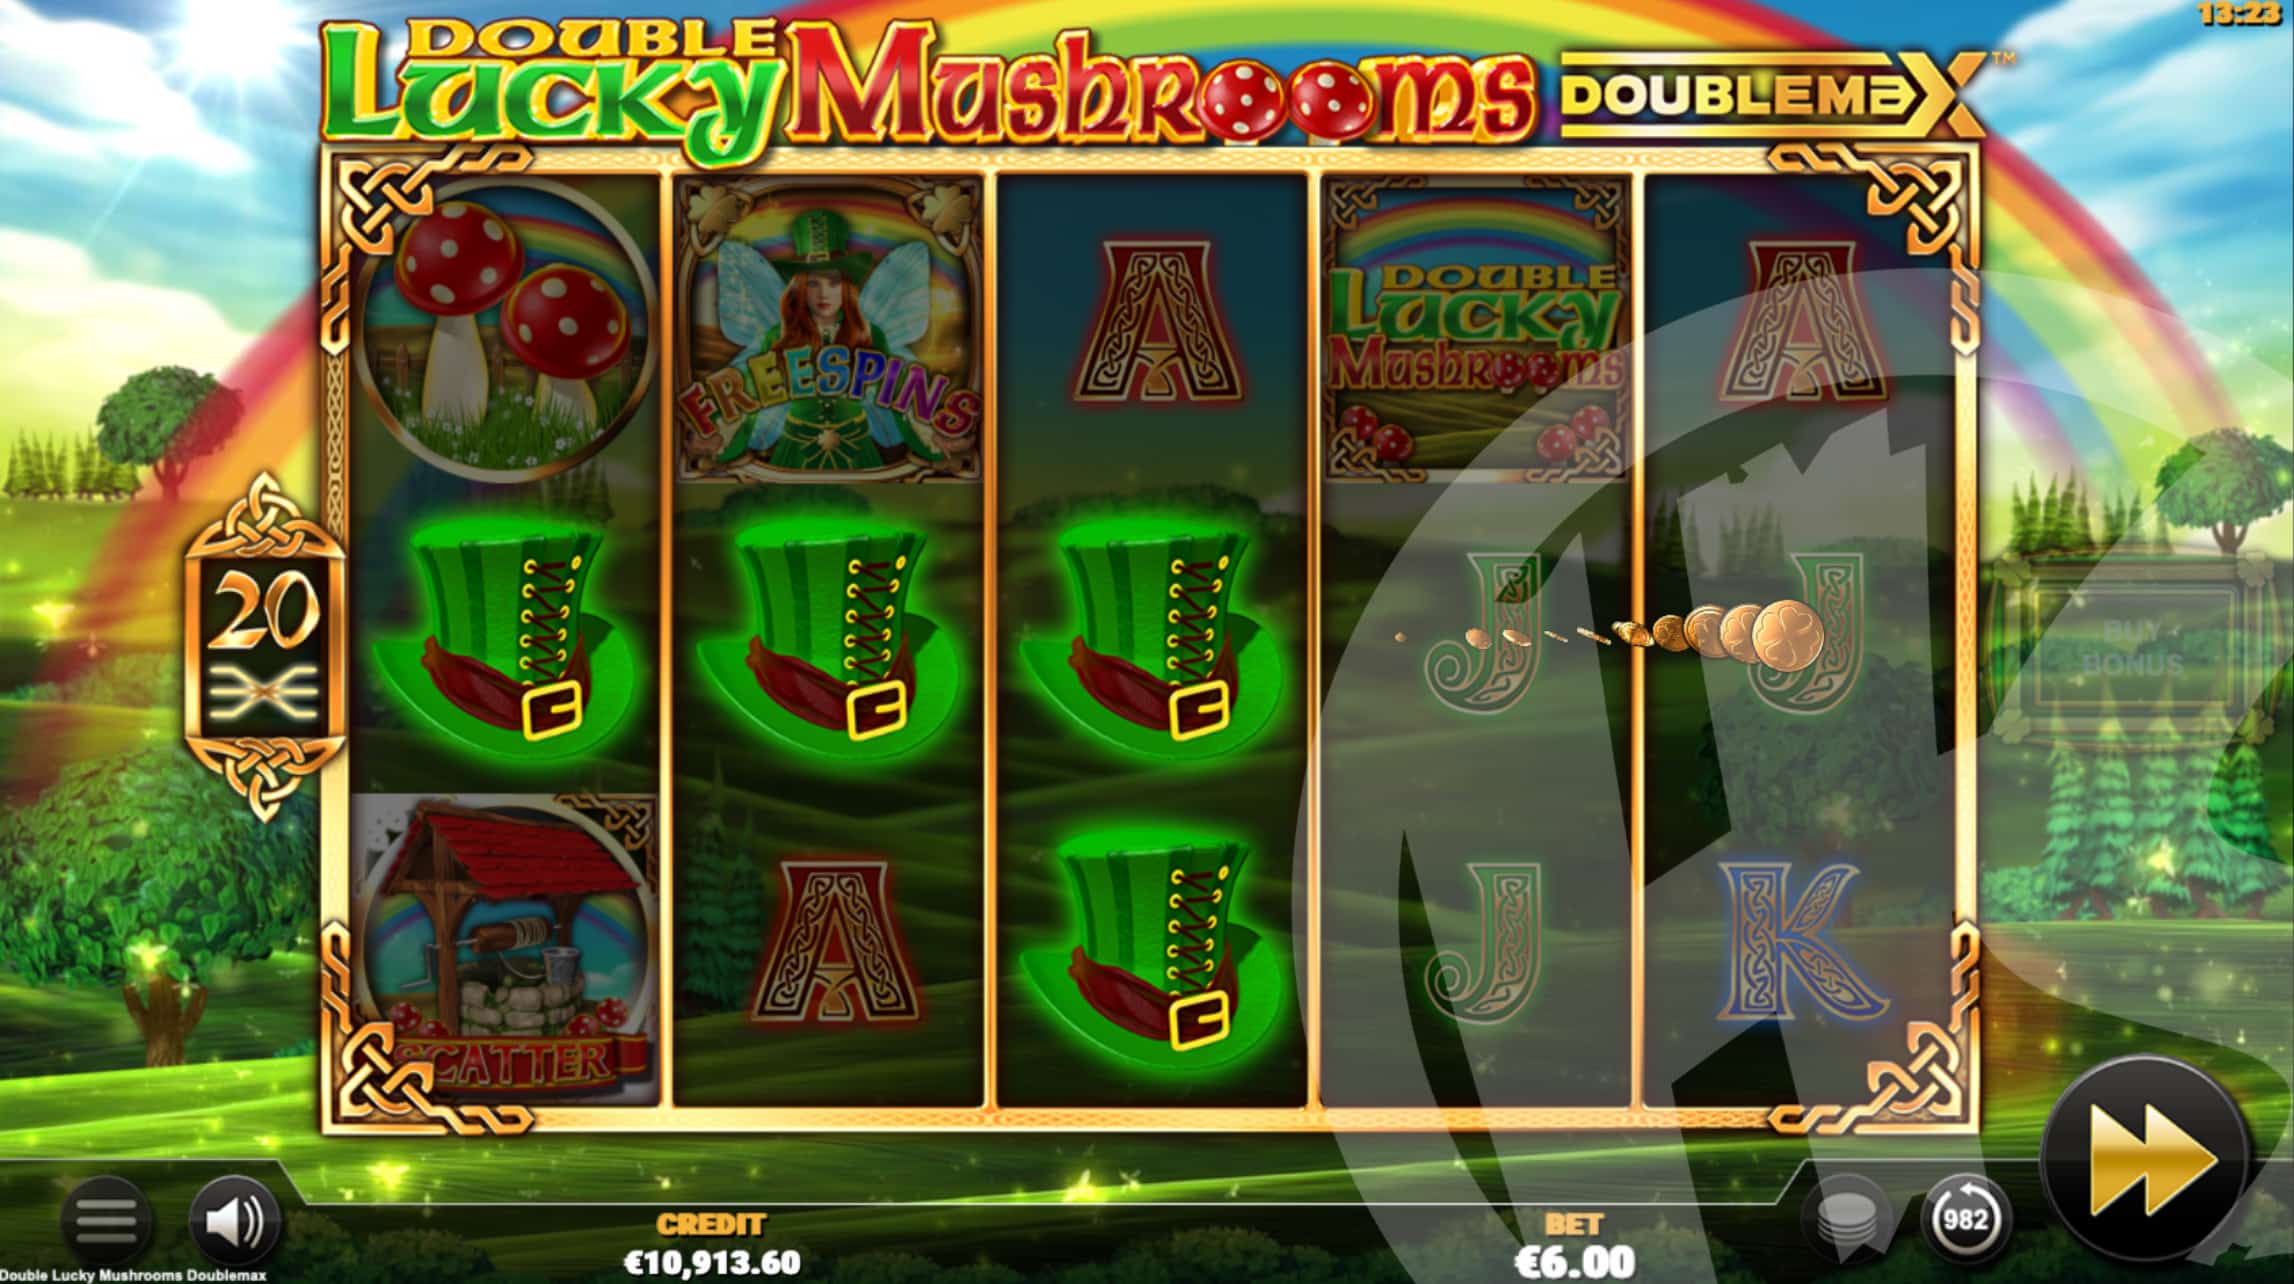 Double Lucky Mushrooms DoubleMax Offers Players 20 Fixed Win Lines